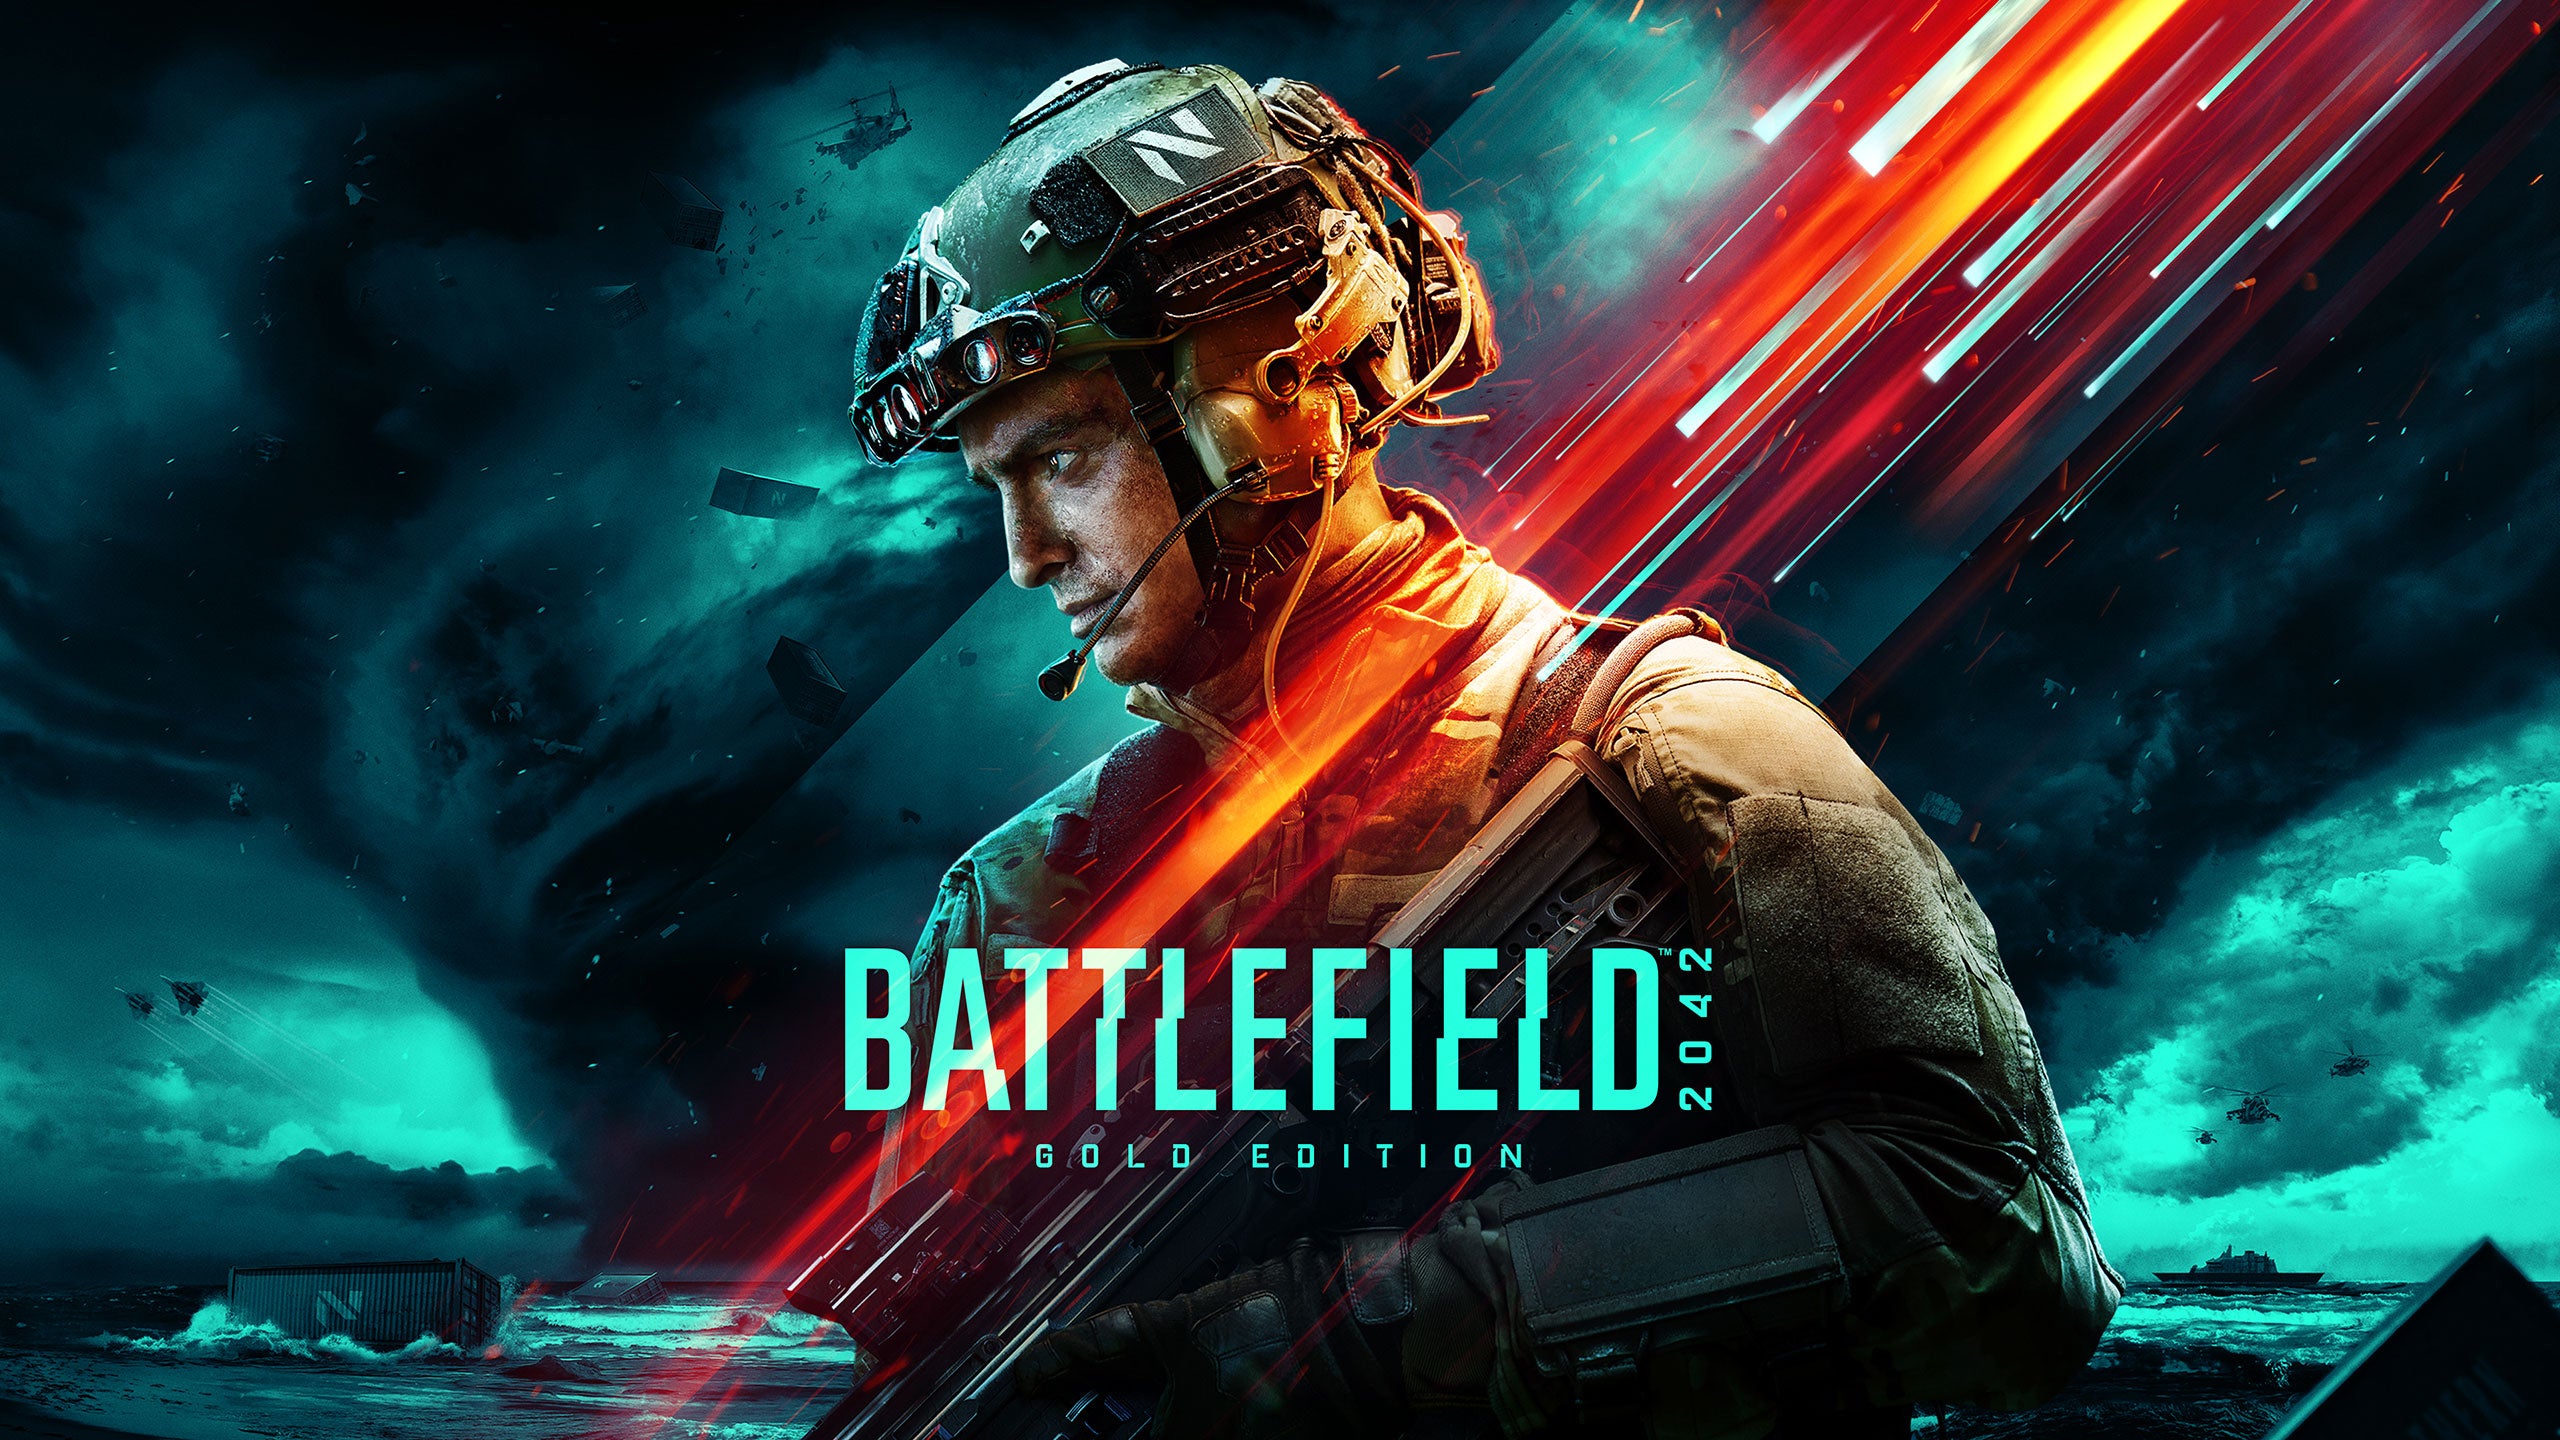 Image for EA rethinking Battlefield development process "from the ground up"